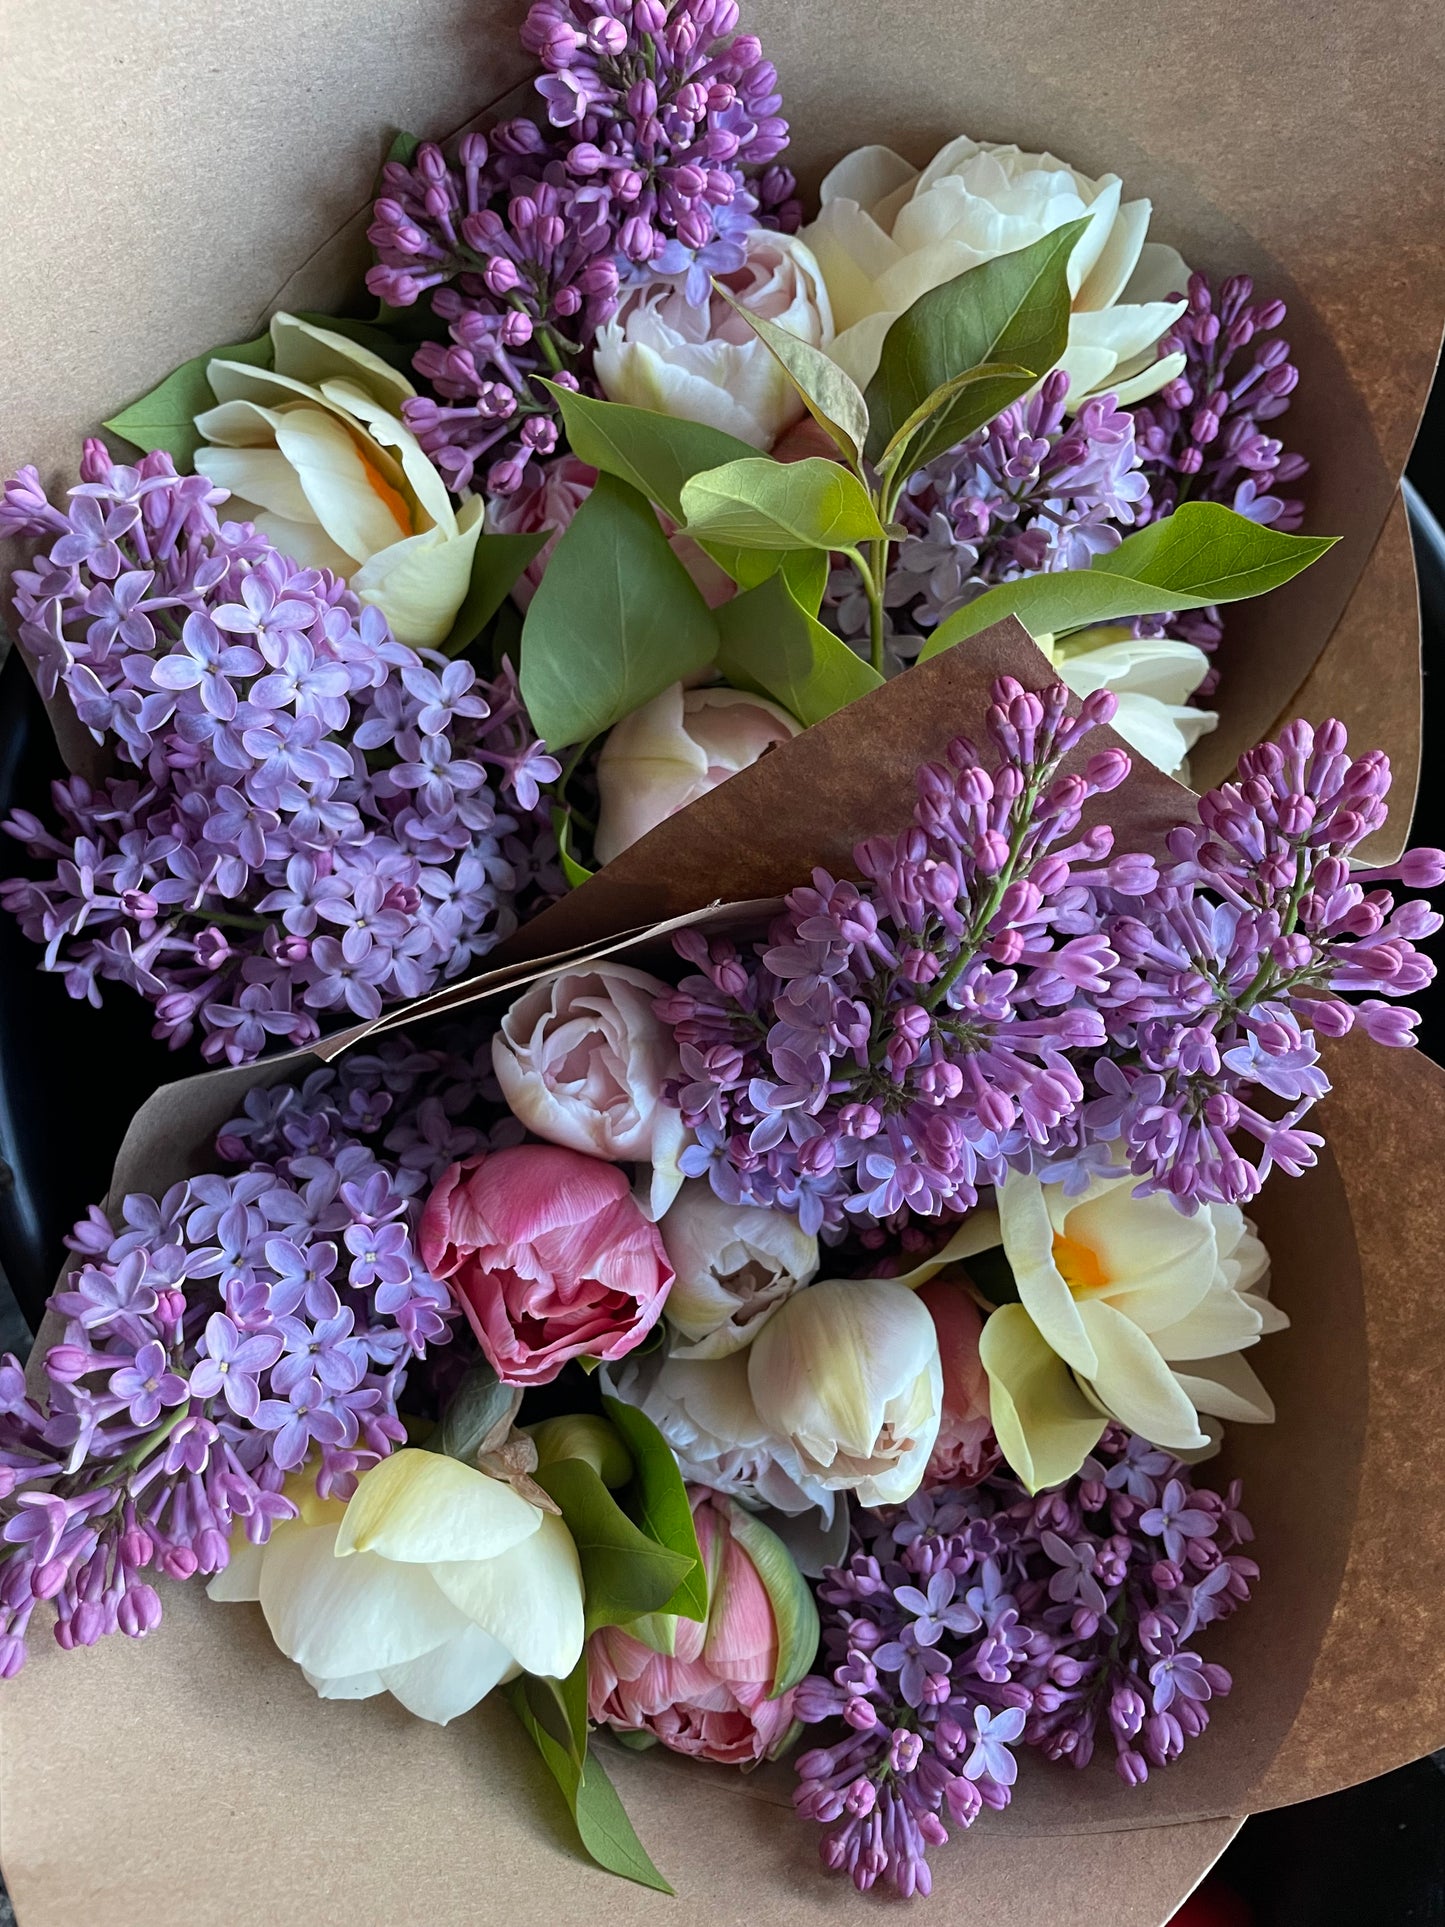 Flower Subscriptions - Shipped